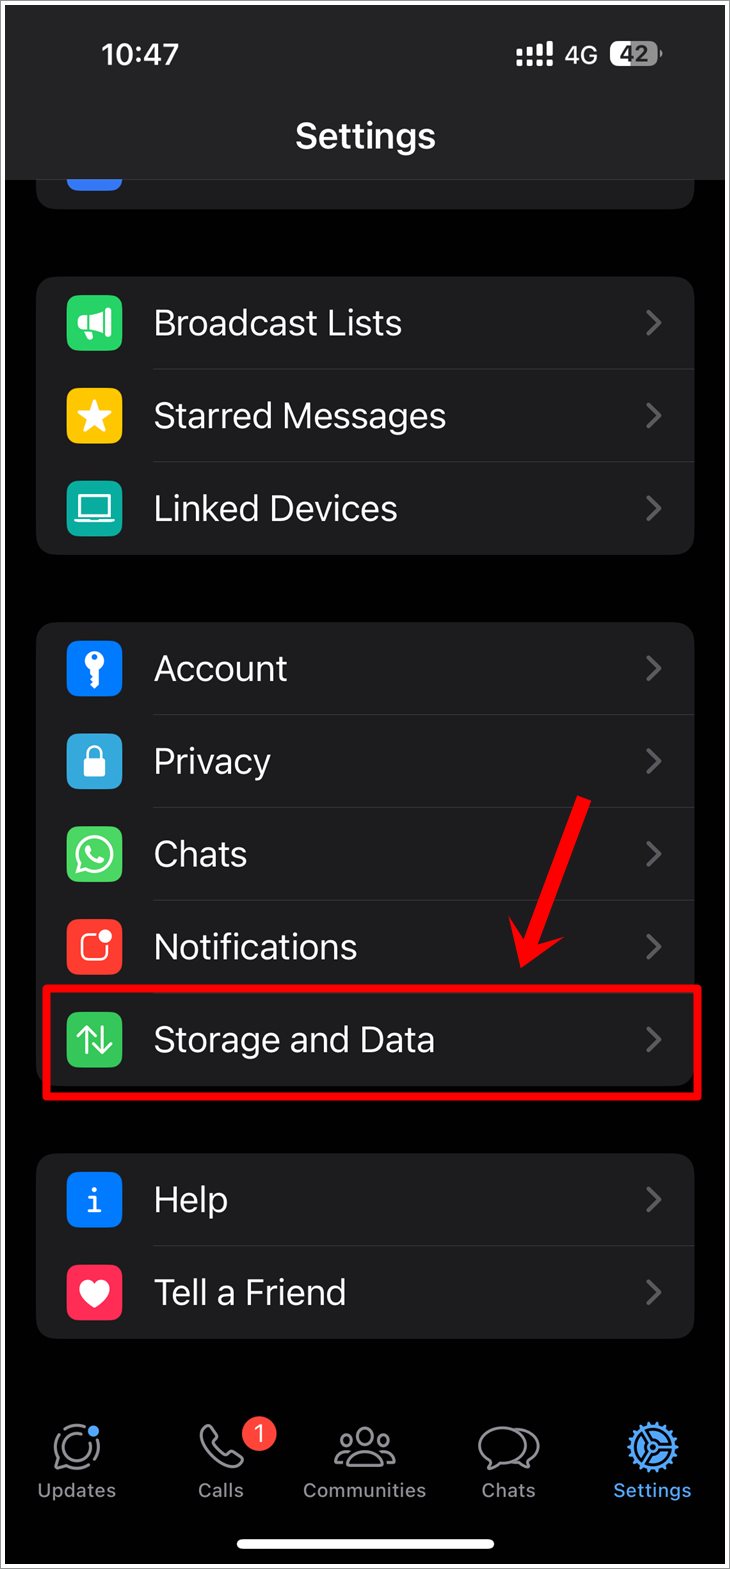 This is a screenshot of WhatsApp's 'Settings' page on an iPhone, with the 'Storage and Data' option highlighted.